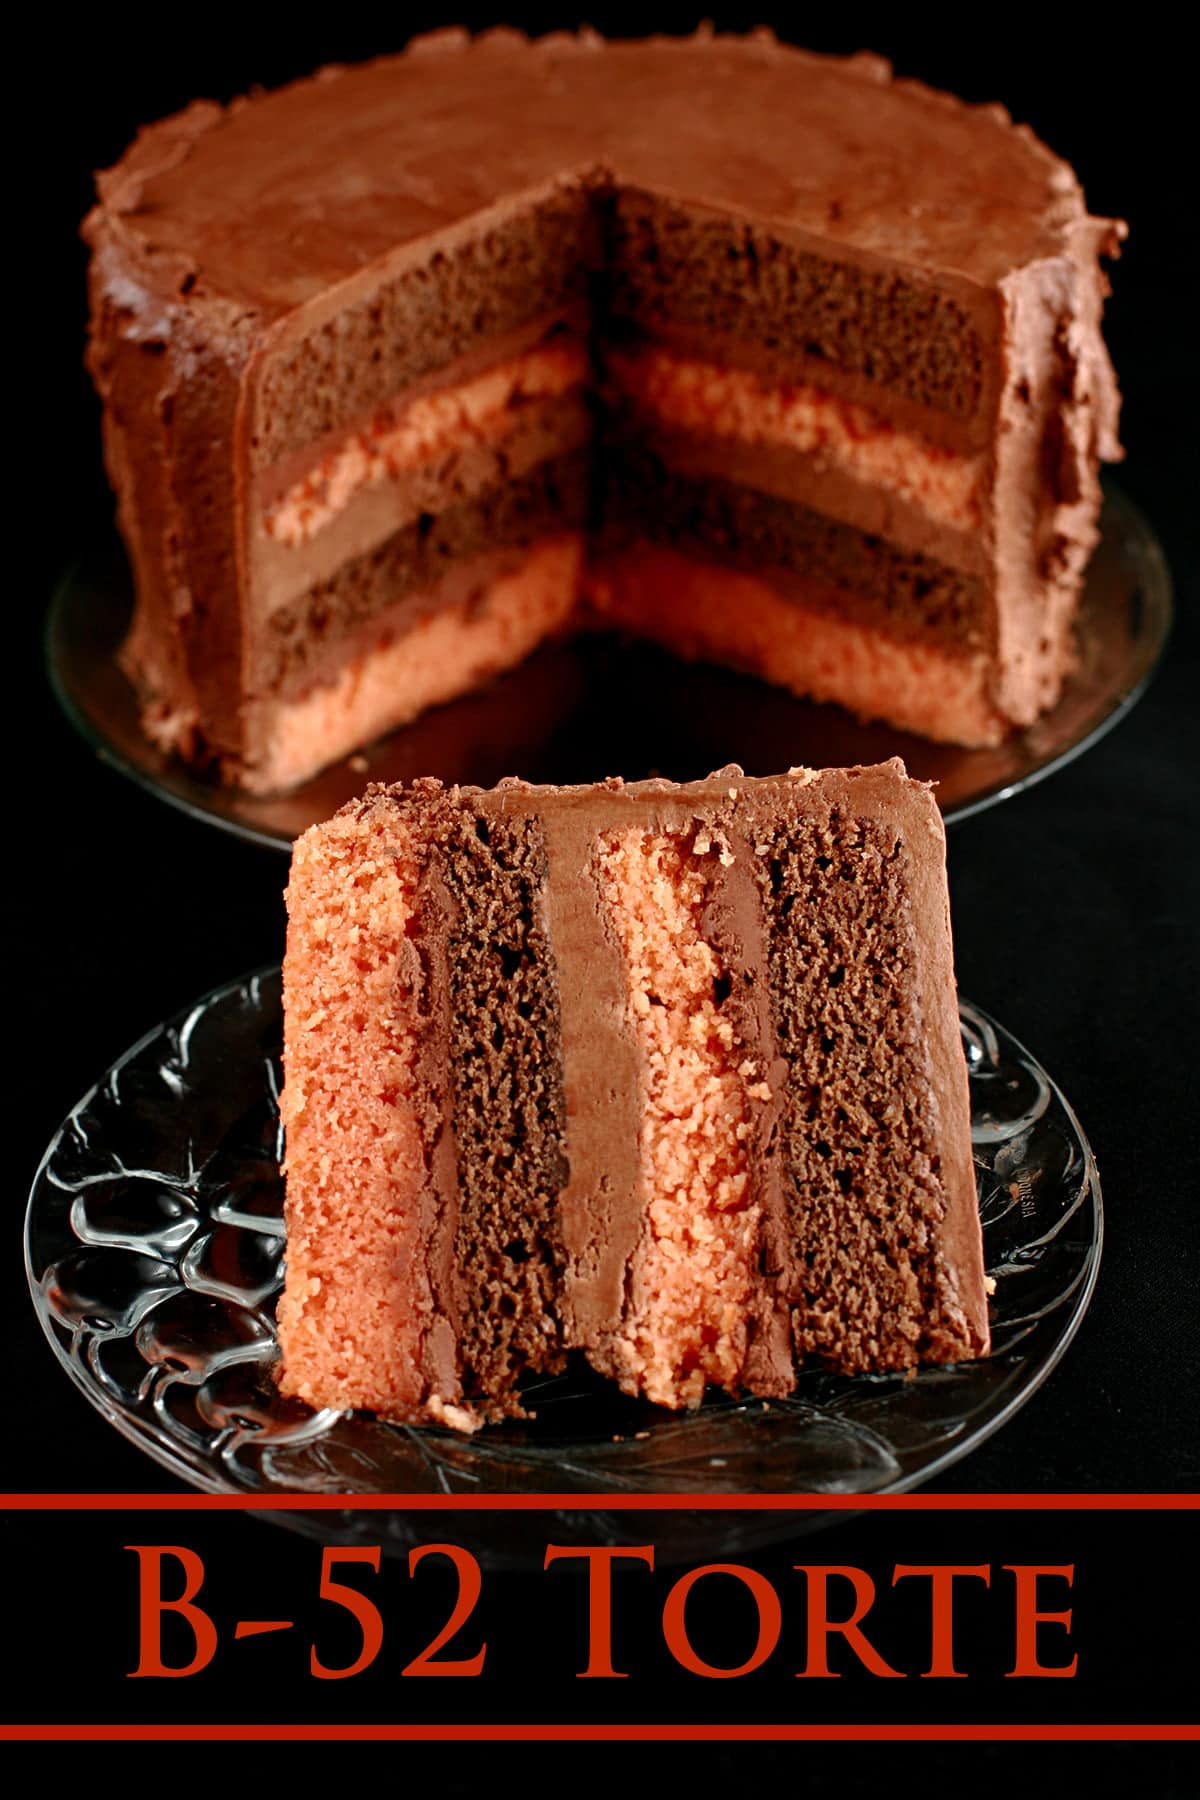 A large slice of B-52 Cake is shown in front of a round, whole cake with a section cut out. The cake shows layers of mocha and orange cakes, separated by layers of blood orange ganache and Irish Cream buttercream.